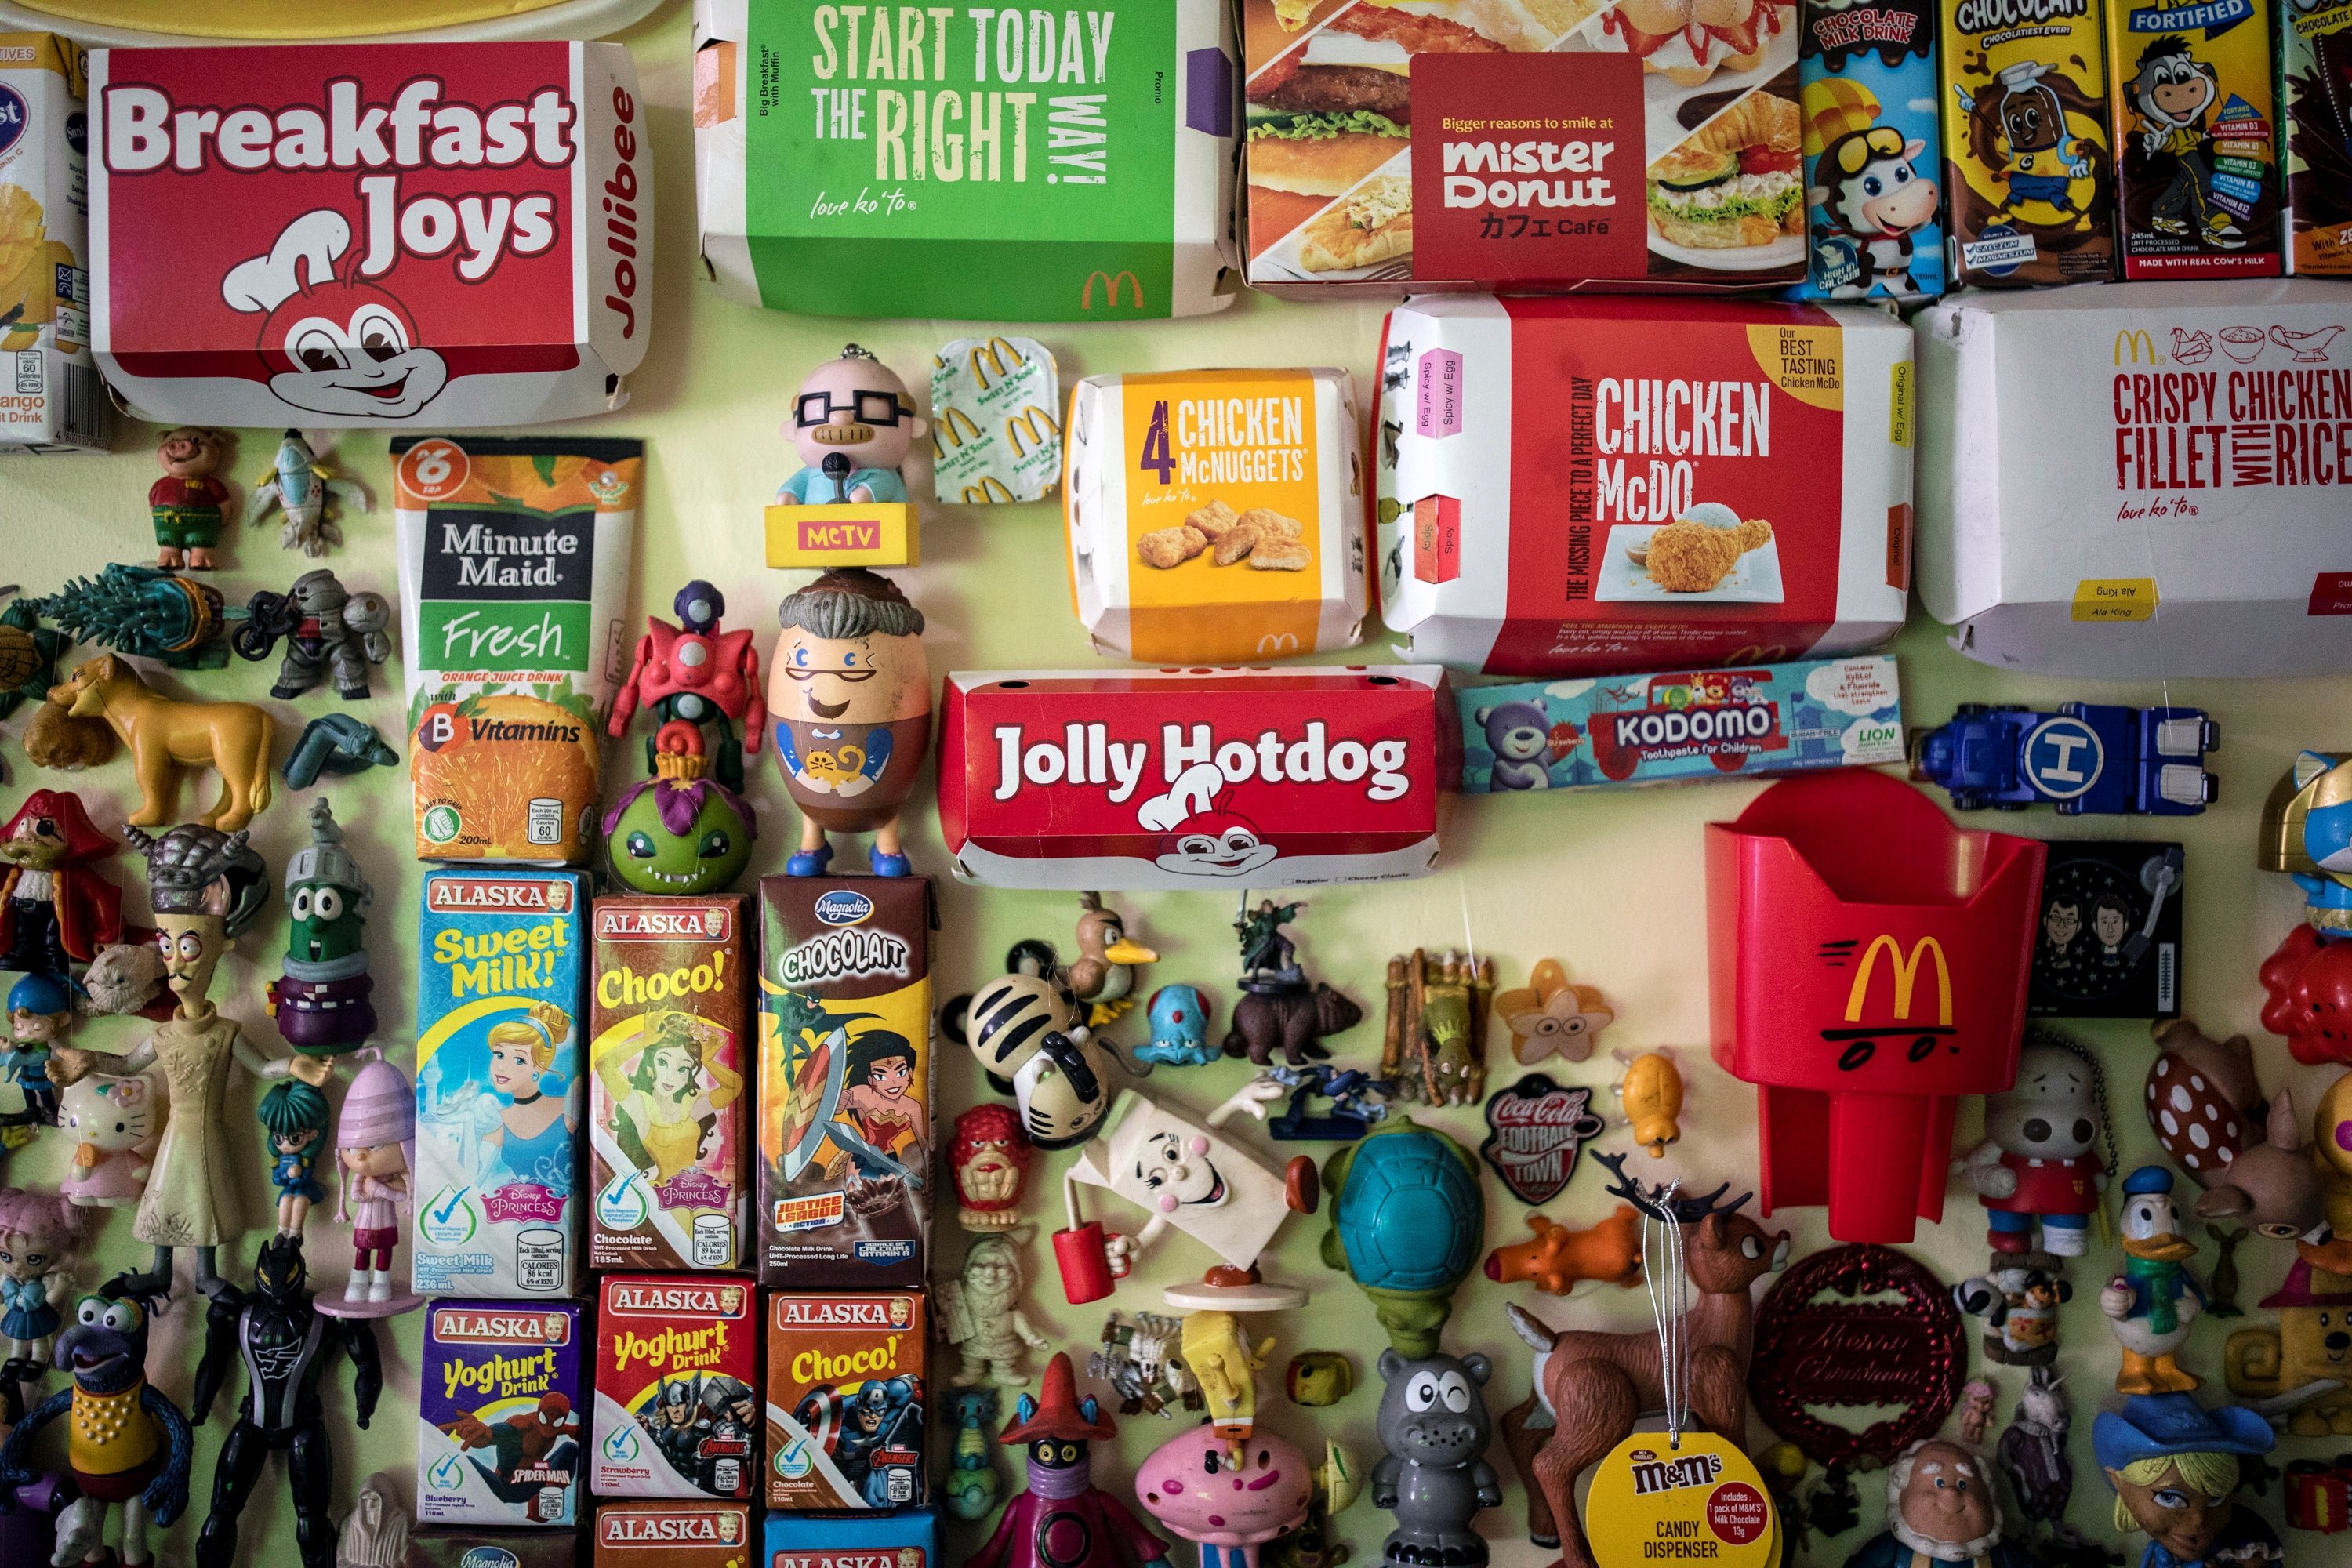 Percival Lugue, who has the Guinness world record for the largest fast-food toy collection, poses with his toy collection in his home in Apalit, Pampanga province, Philippines, April 20, 2021. (REUTERS Photo)